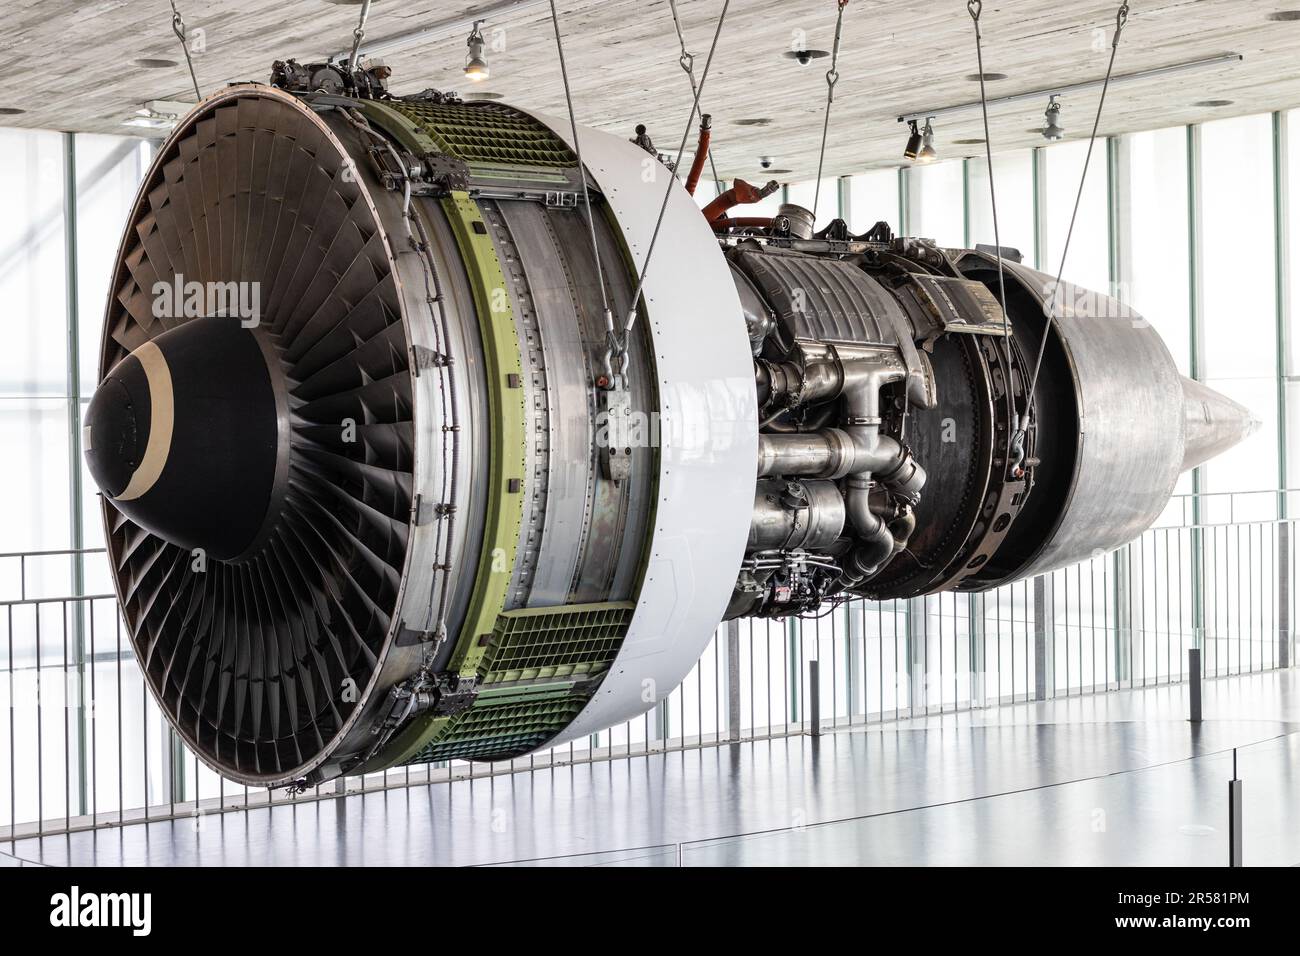 Coruna, Spain; may 18, 2023: view of Boeing 747 aircraft engine exhibited in on the National Museum of Science and Technology of A Coruna, Spain Stock Photo